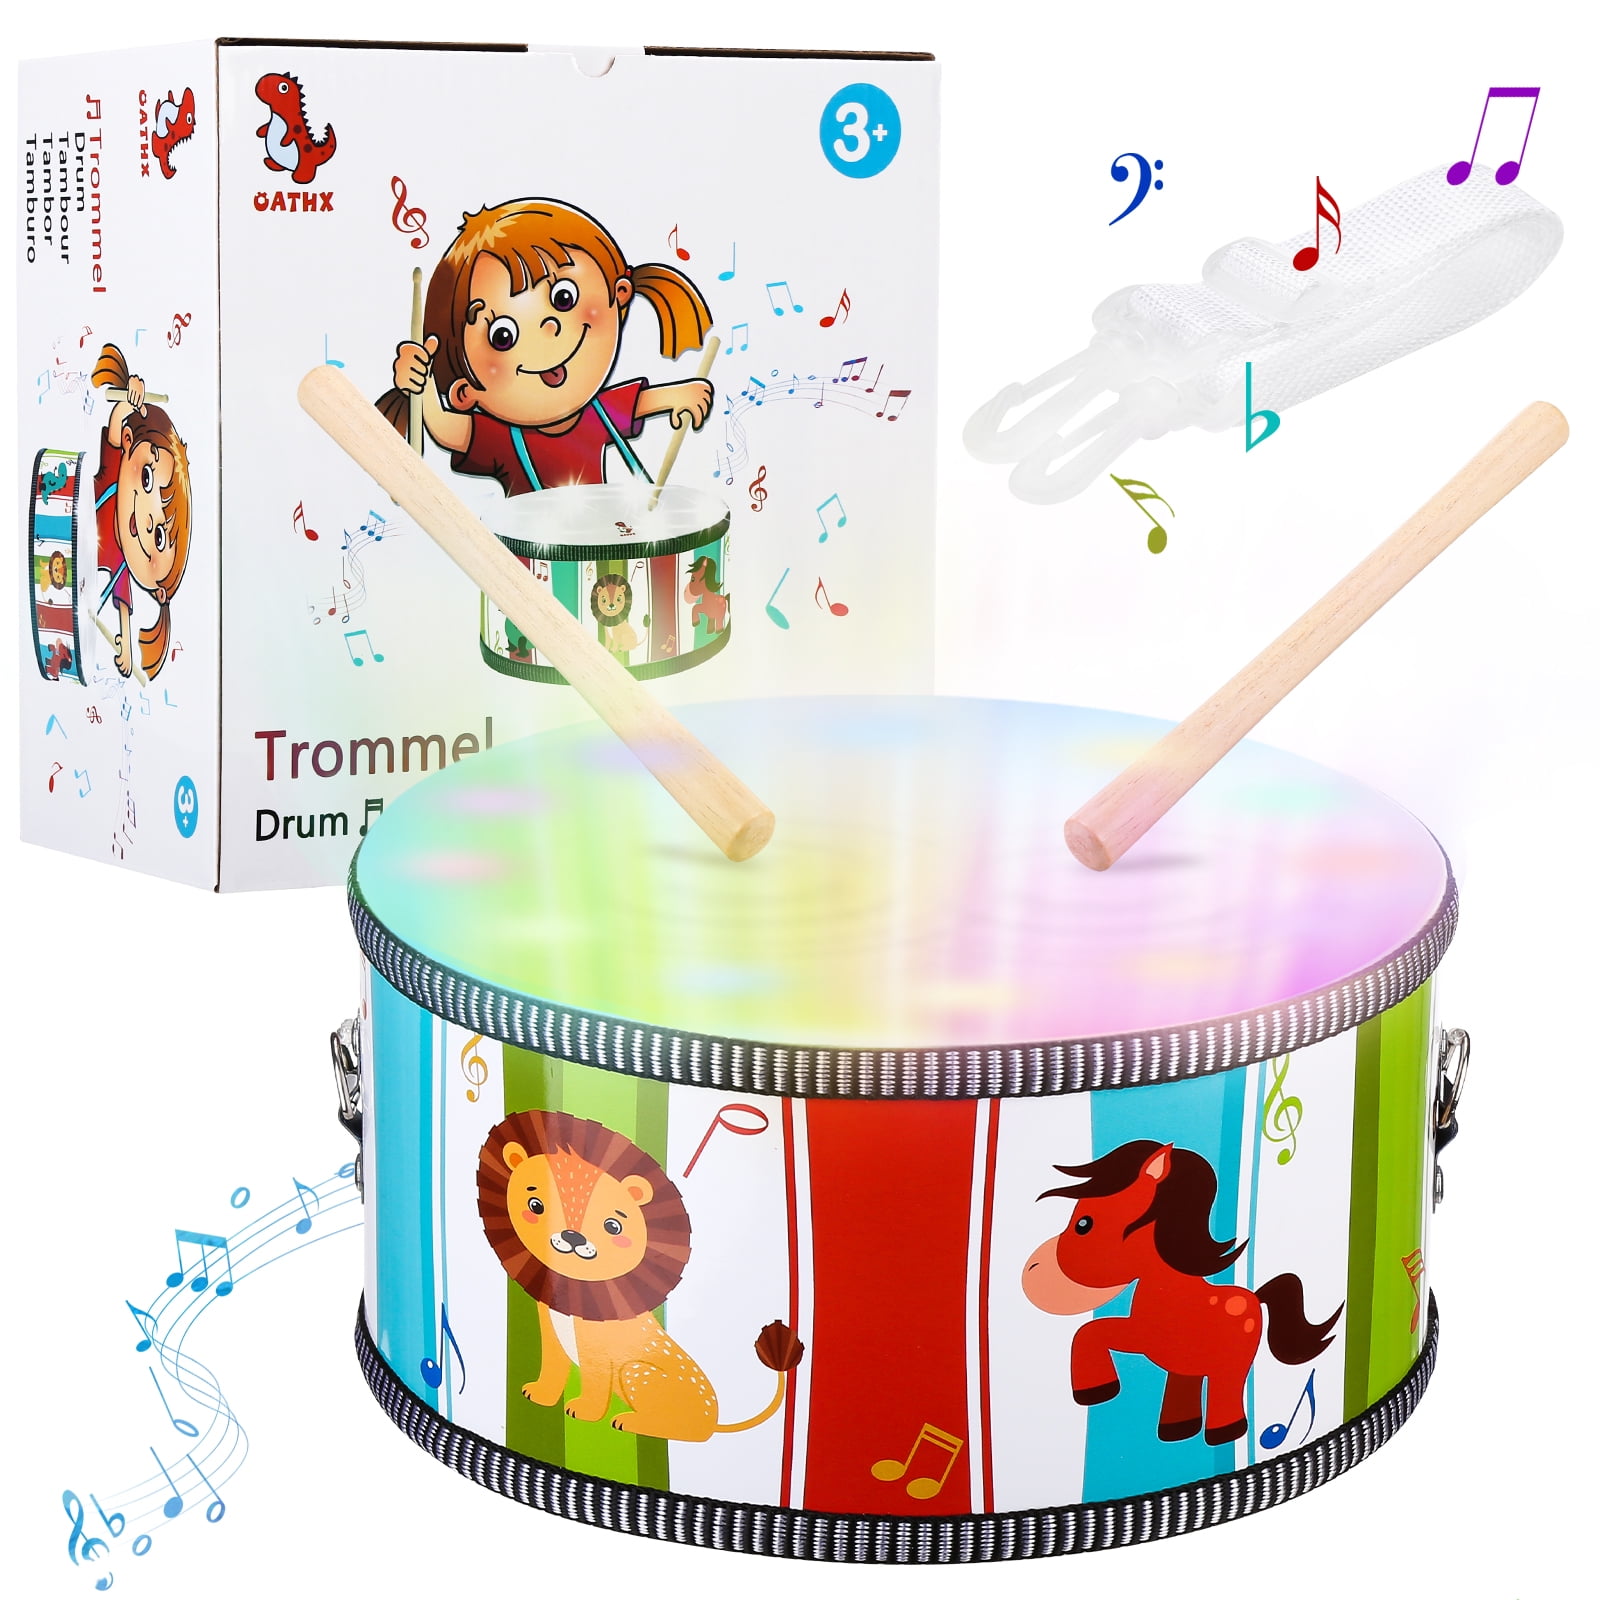 Richgv Babies Drum Toddlers Musical Drum Set Educational Toys for 1-6 Year-Olds Electronic Drum Instruments with Lights 